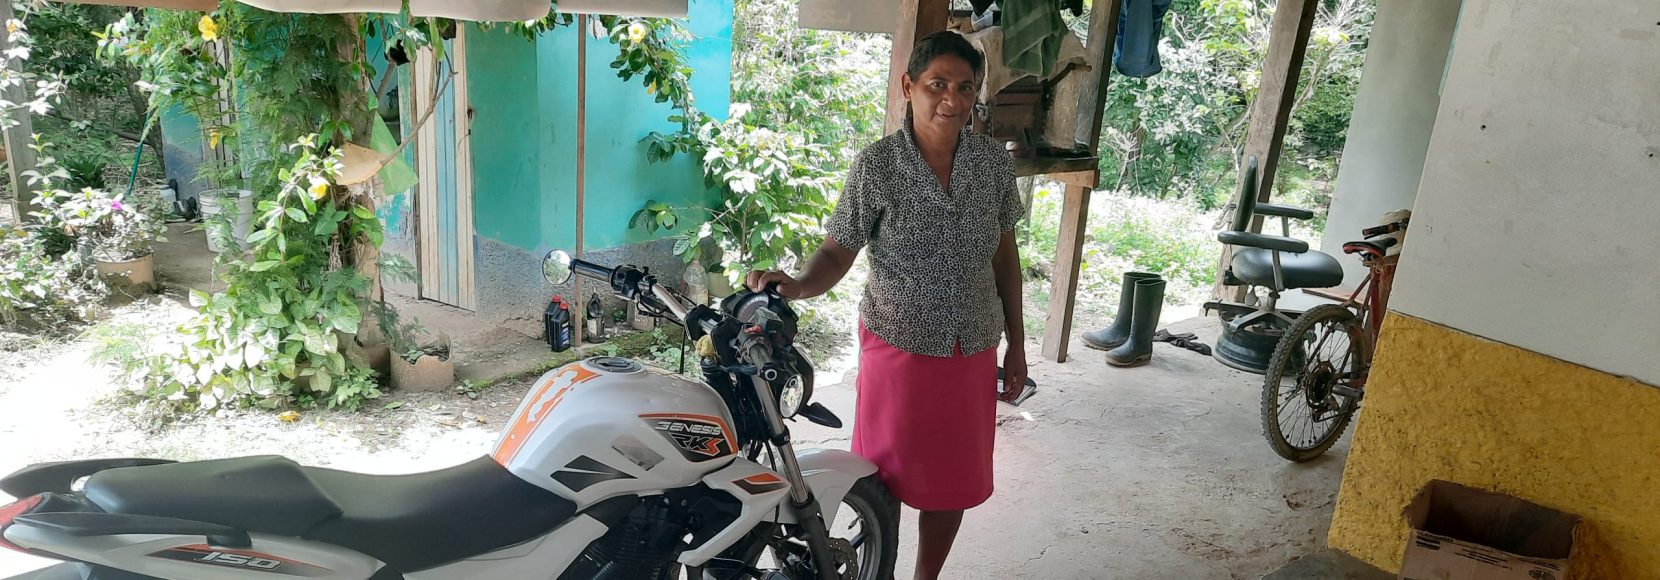 Maria Rosales with her motorcycle in Honduras